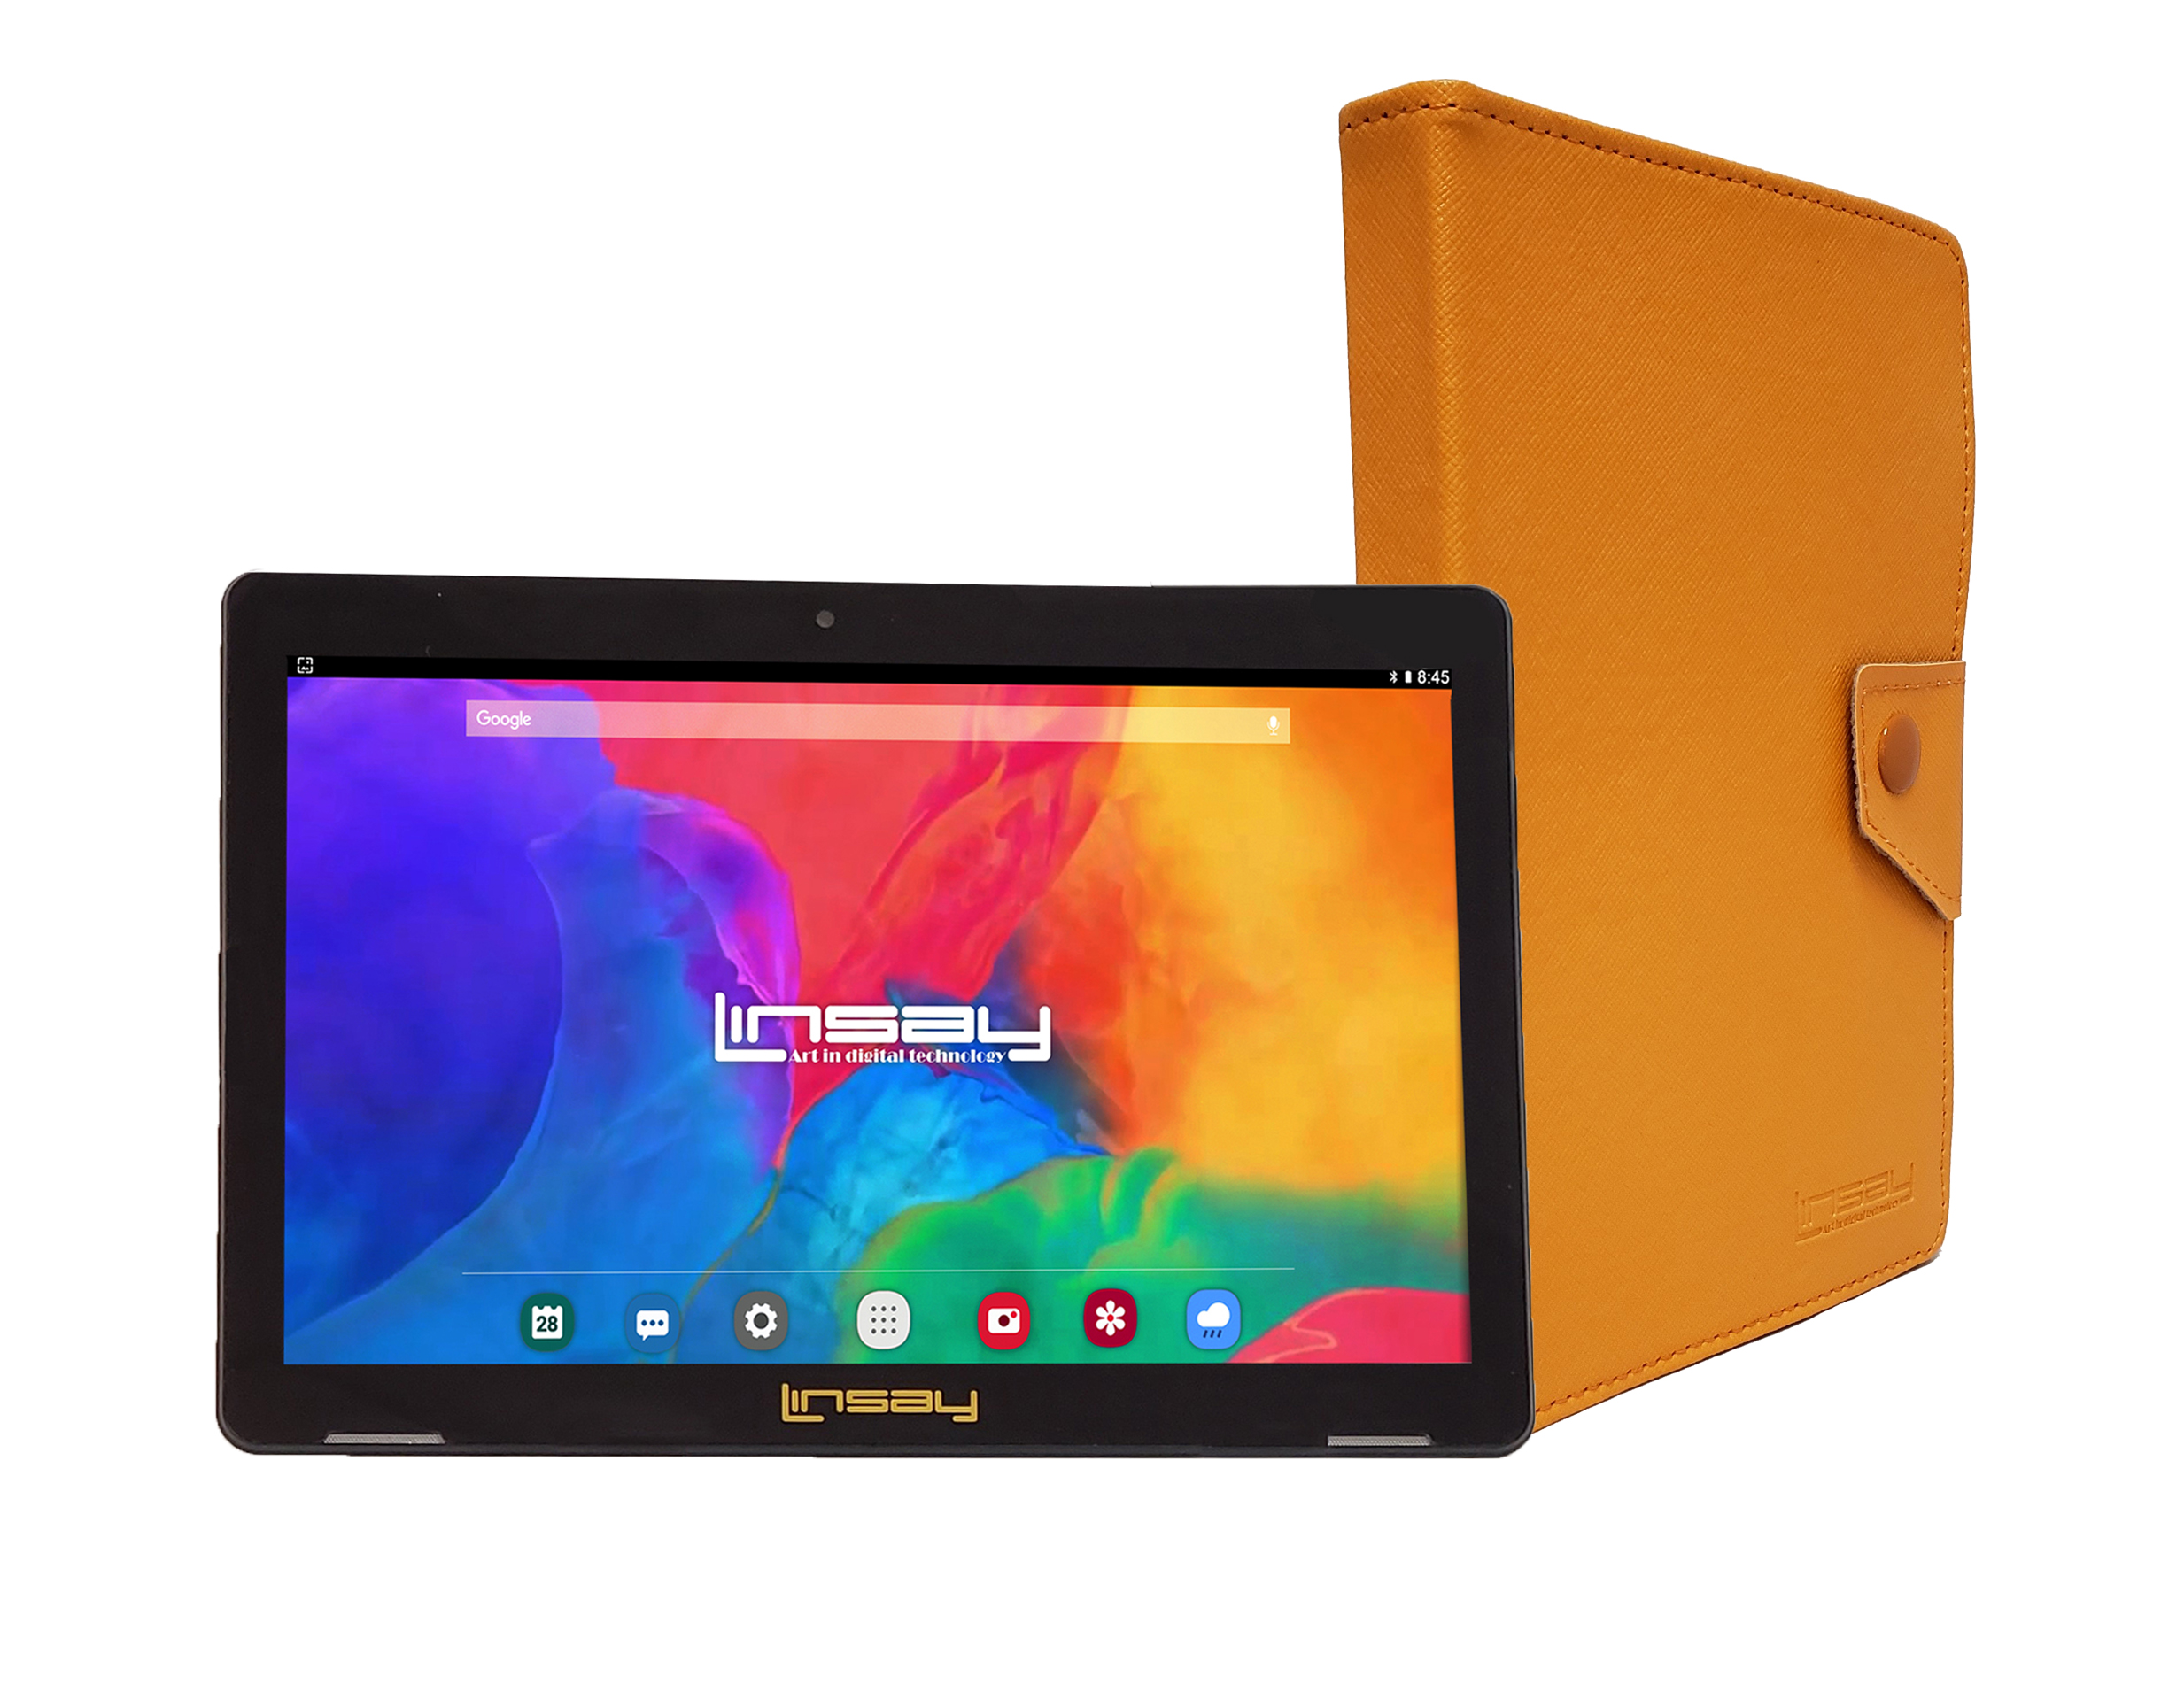 LINSAY 10.1" IPS 2GB RAM 64GB Storage Android 13 Tablet with Protective case Orange color, Google Certified - image 3 of 3